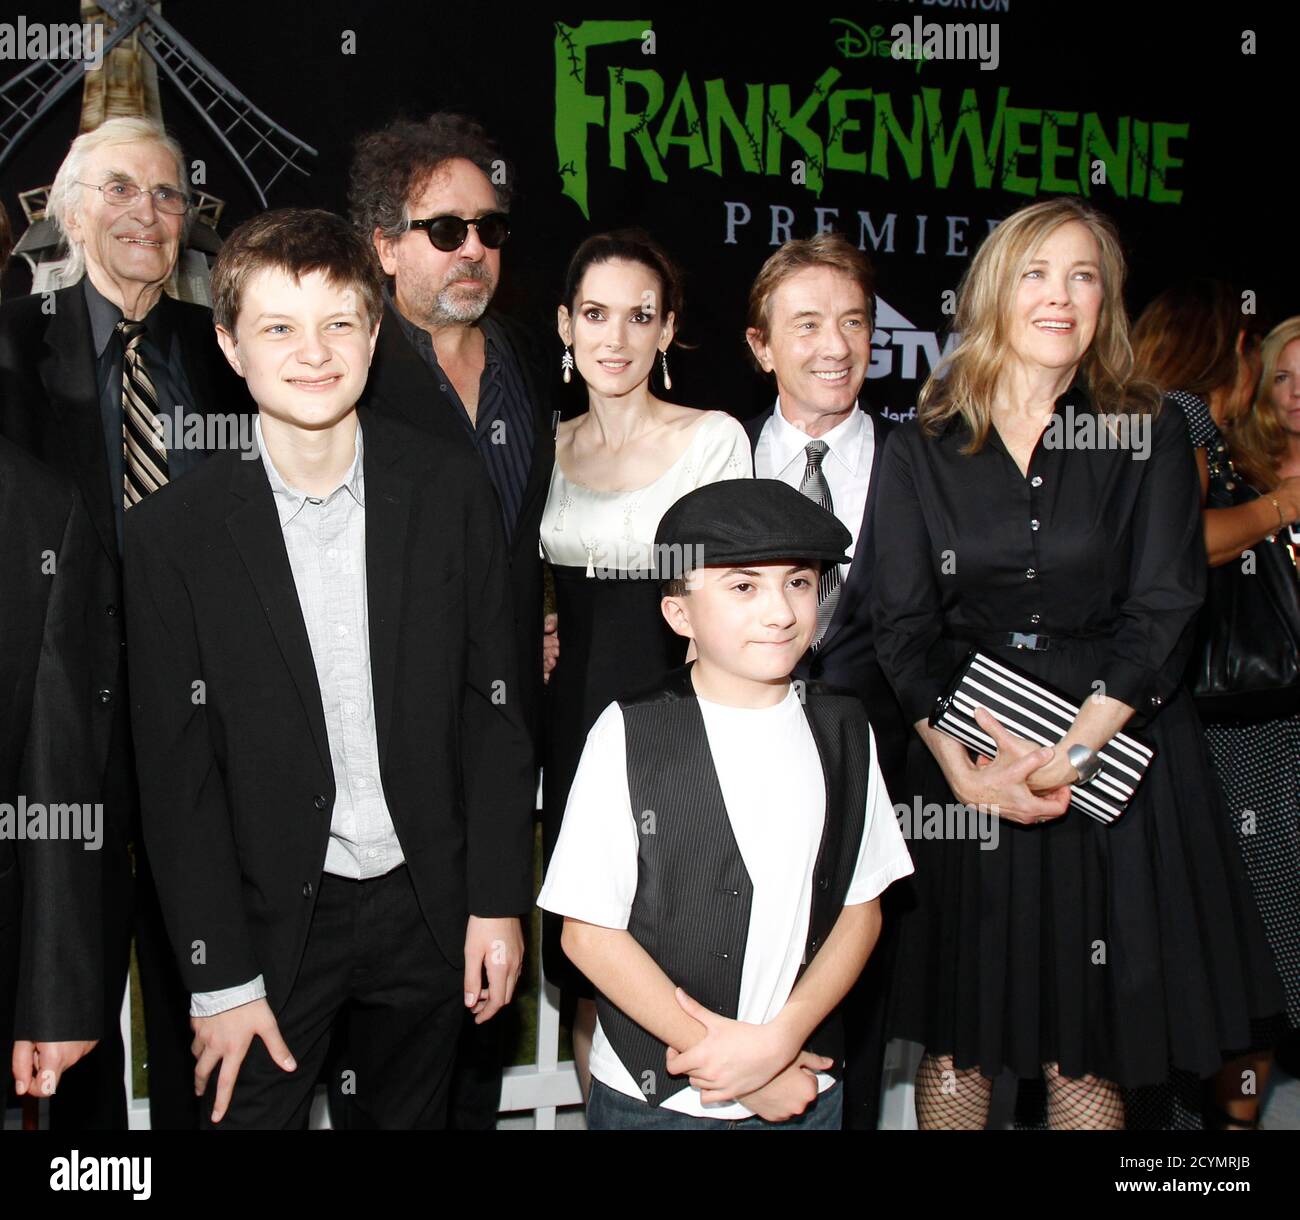 Director and producer Tim Burton (3rd L) poses with cast members (from L-R)  Martin Landau, Charlie Tahan, Winona Ryder, Atticus Shaffer, Martin Short  and Catherine O'Hara at the premiere of "Frankenweenie" at